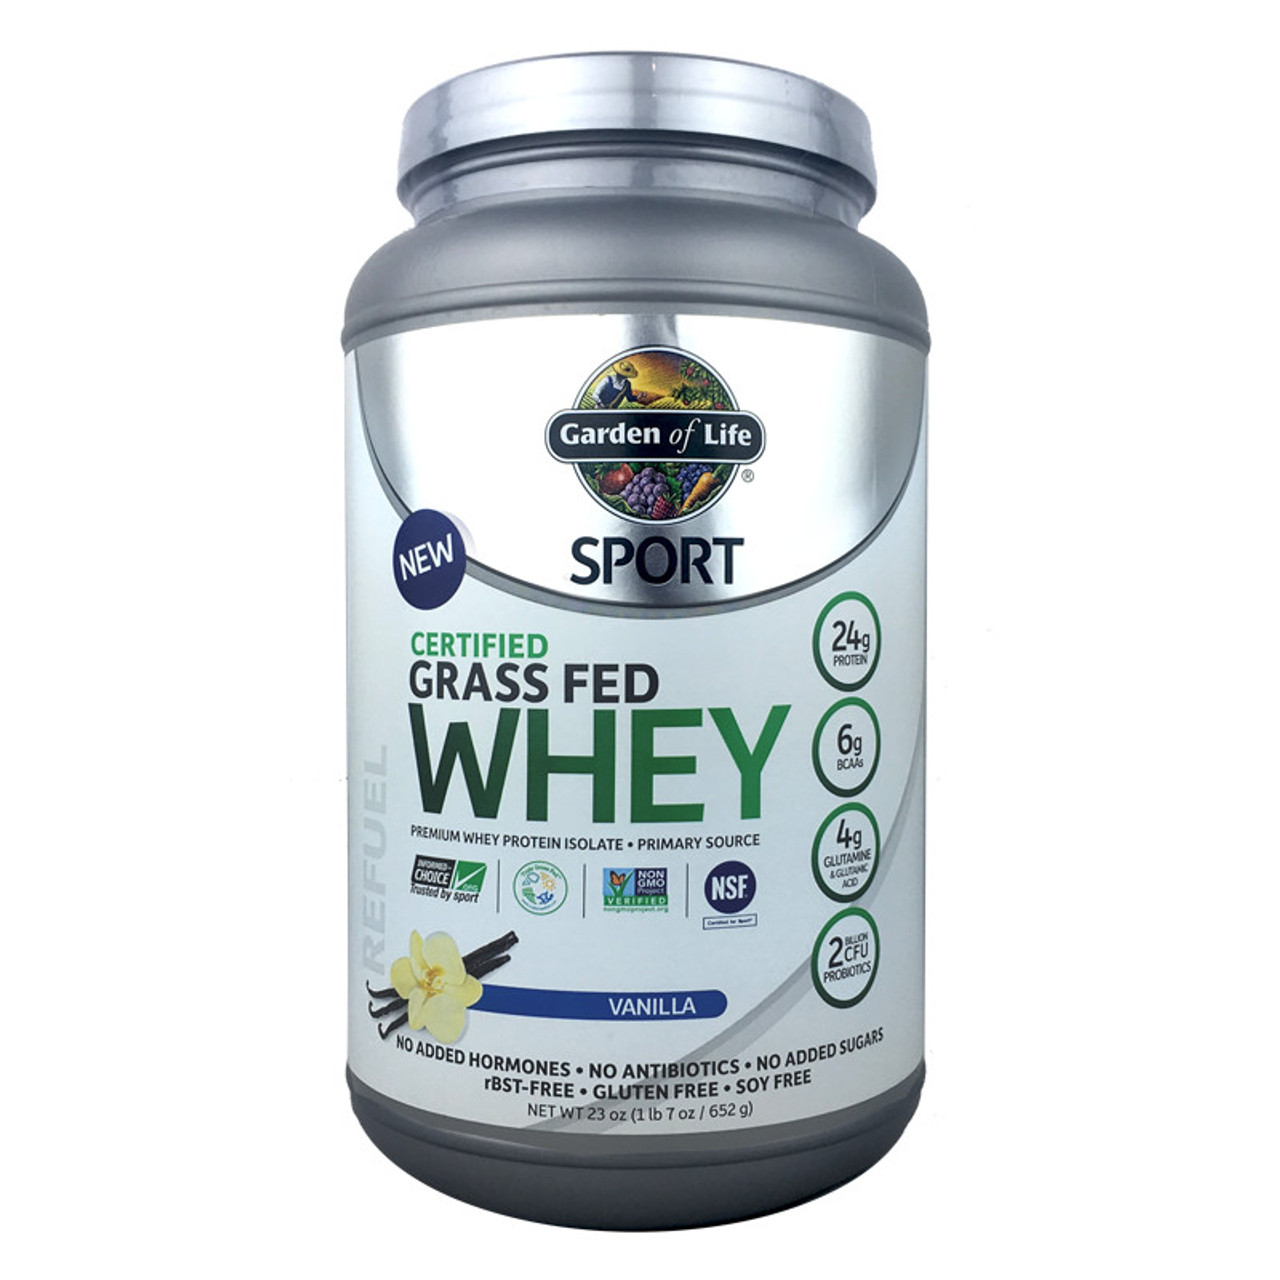 https://cdn11.bigcommerce.com/s-heb185/images/stencil/1280x1280/products/33654/60579/Grass-Fed-Whey-Vanilla-658010120630__97167.1488362840.jpg?c=2